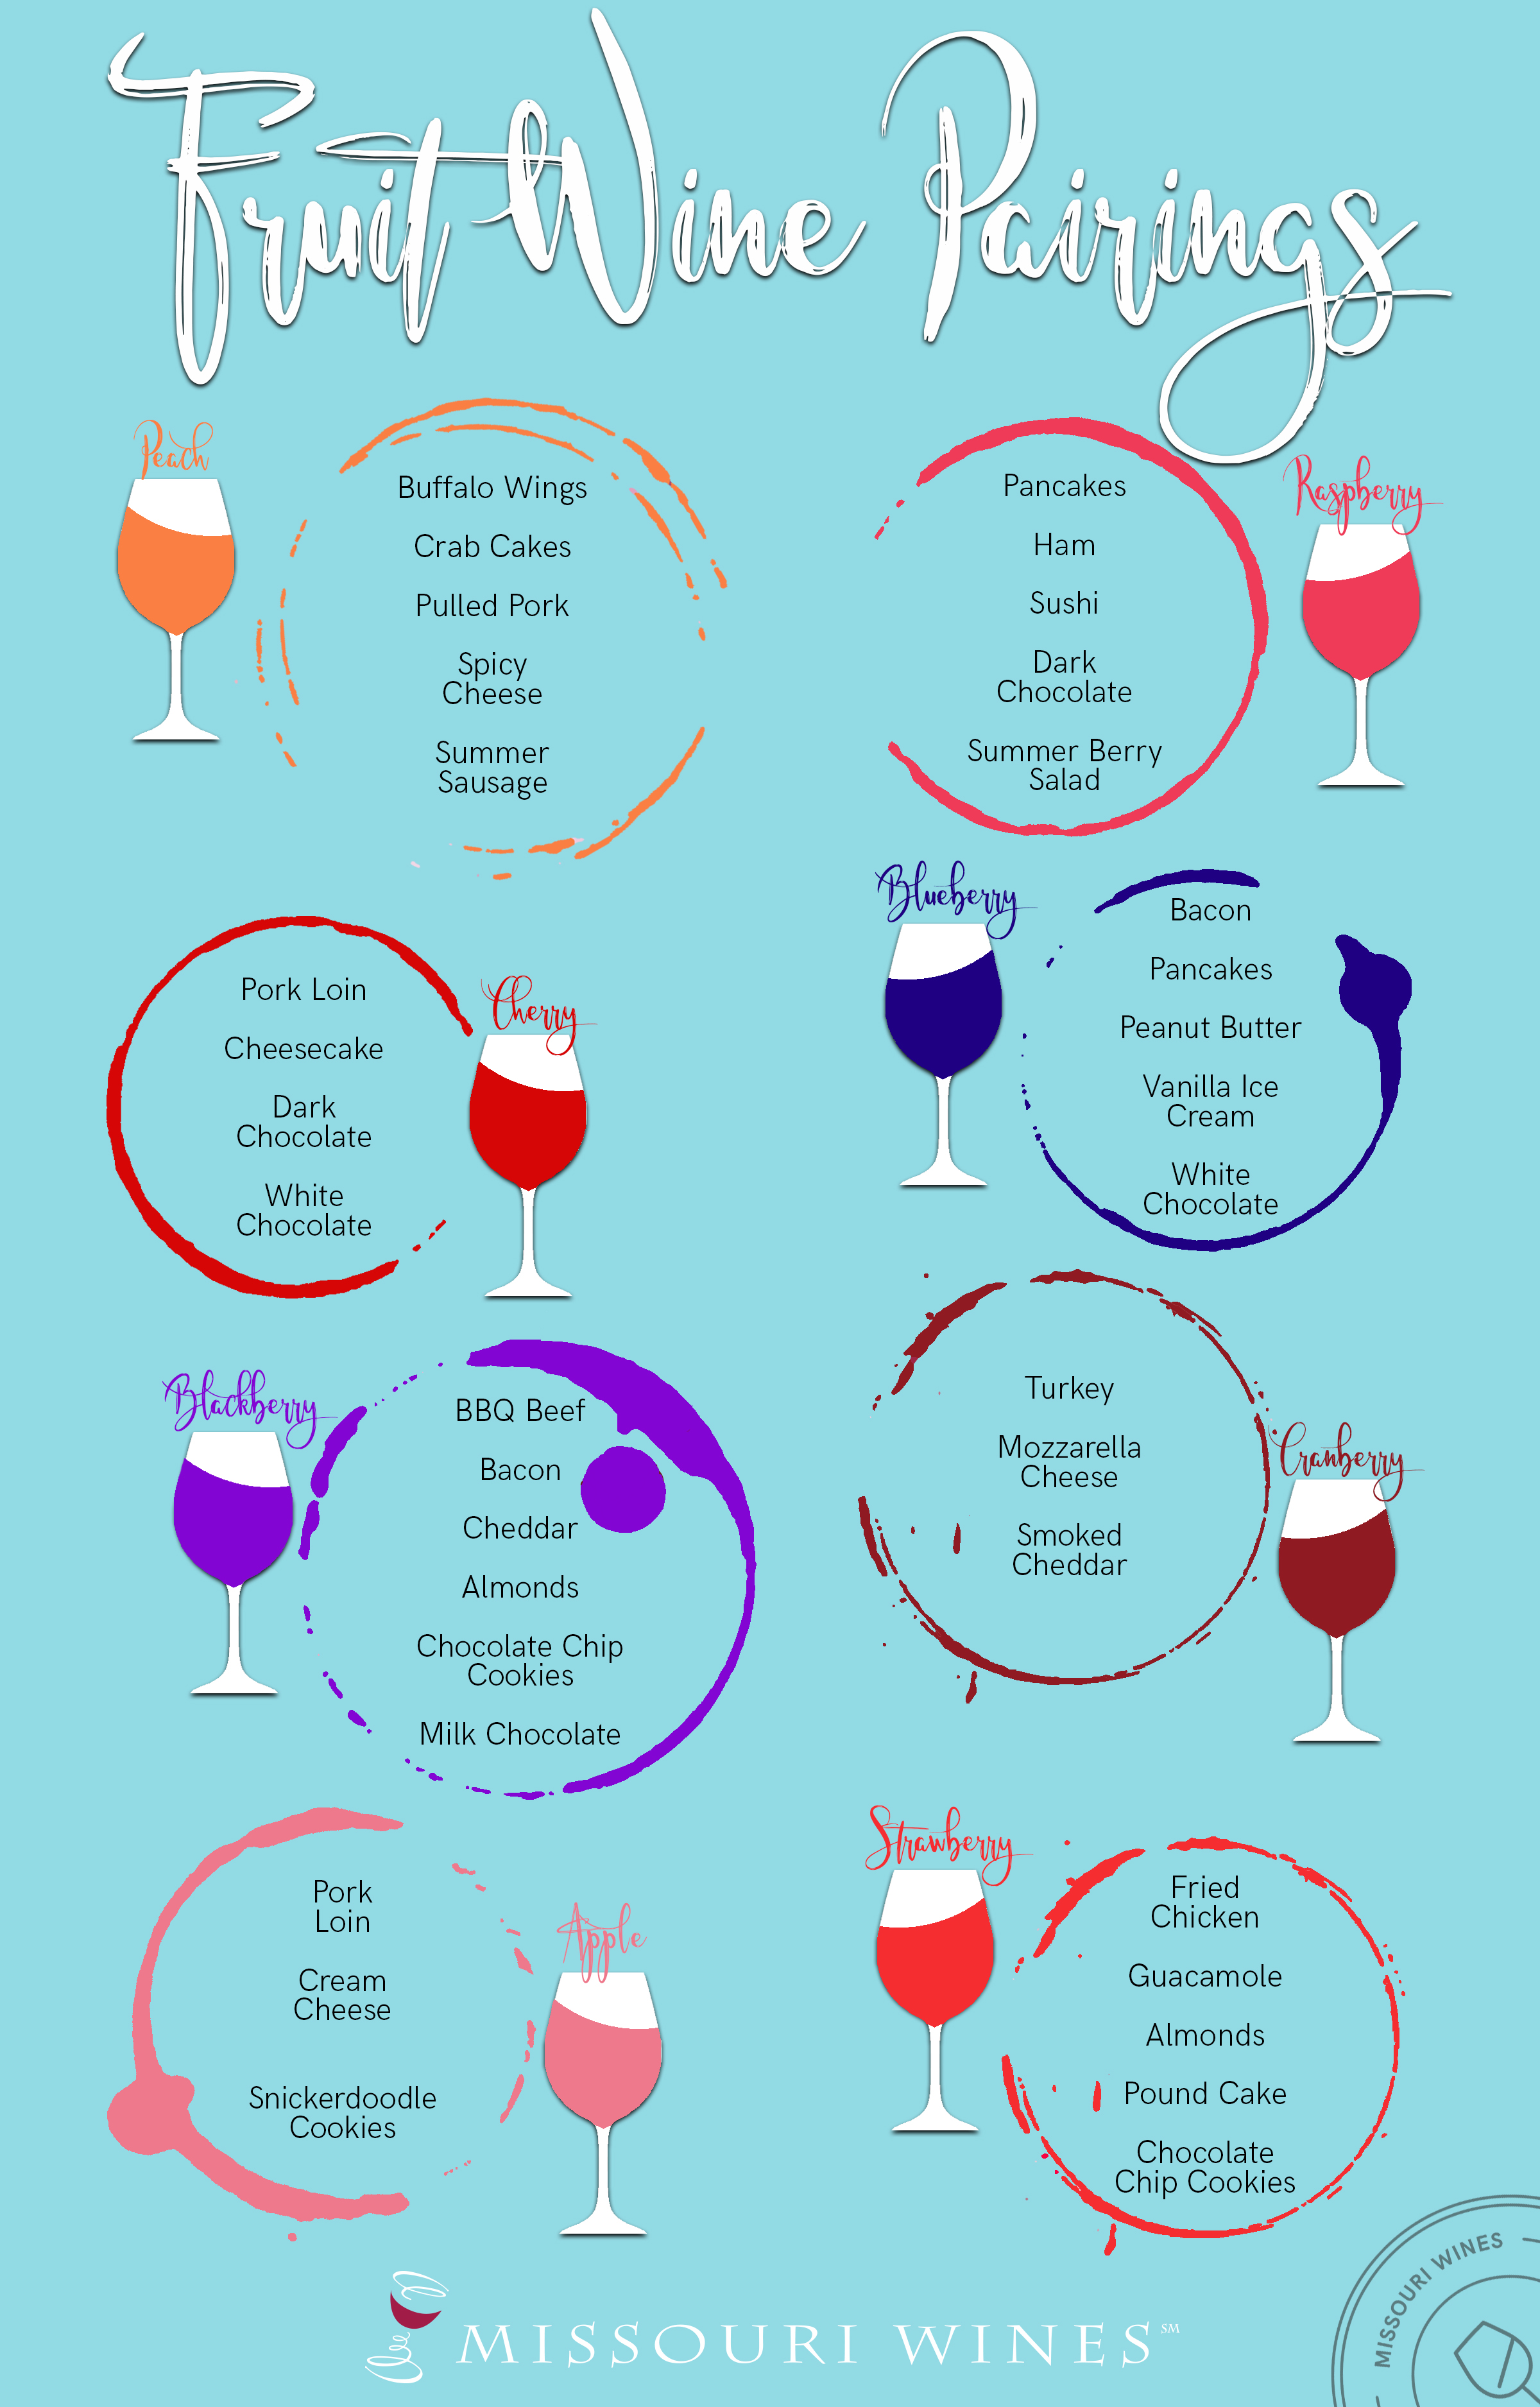 Fruit Wine and Food Pairing